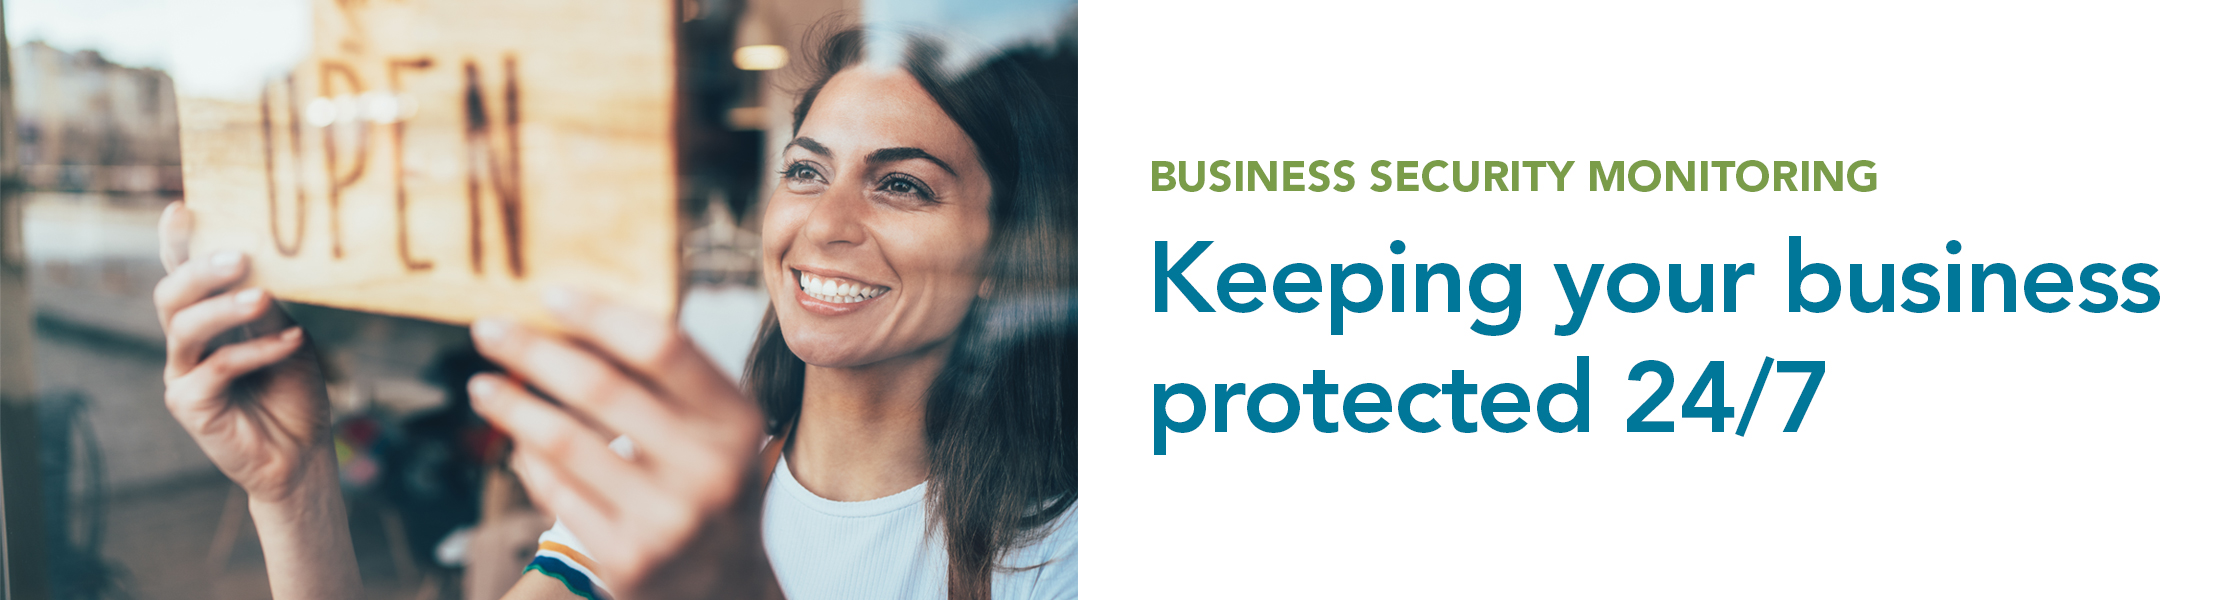 Keeping your business protected